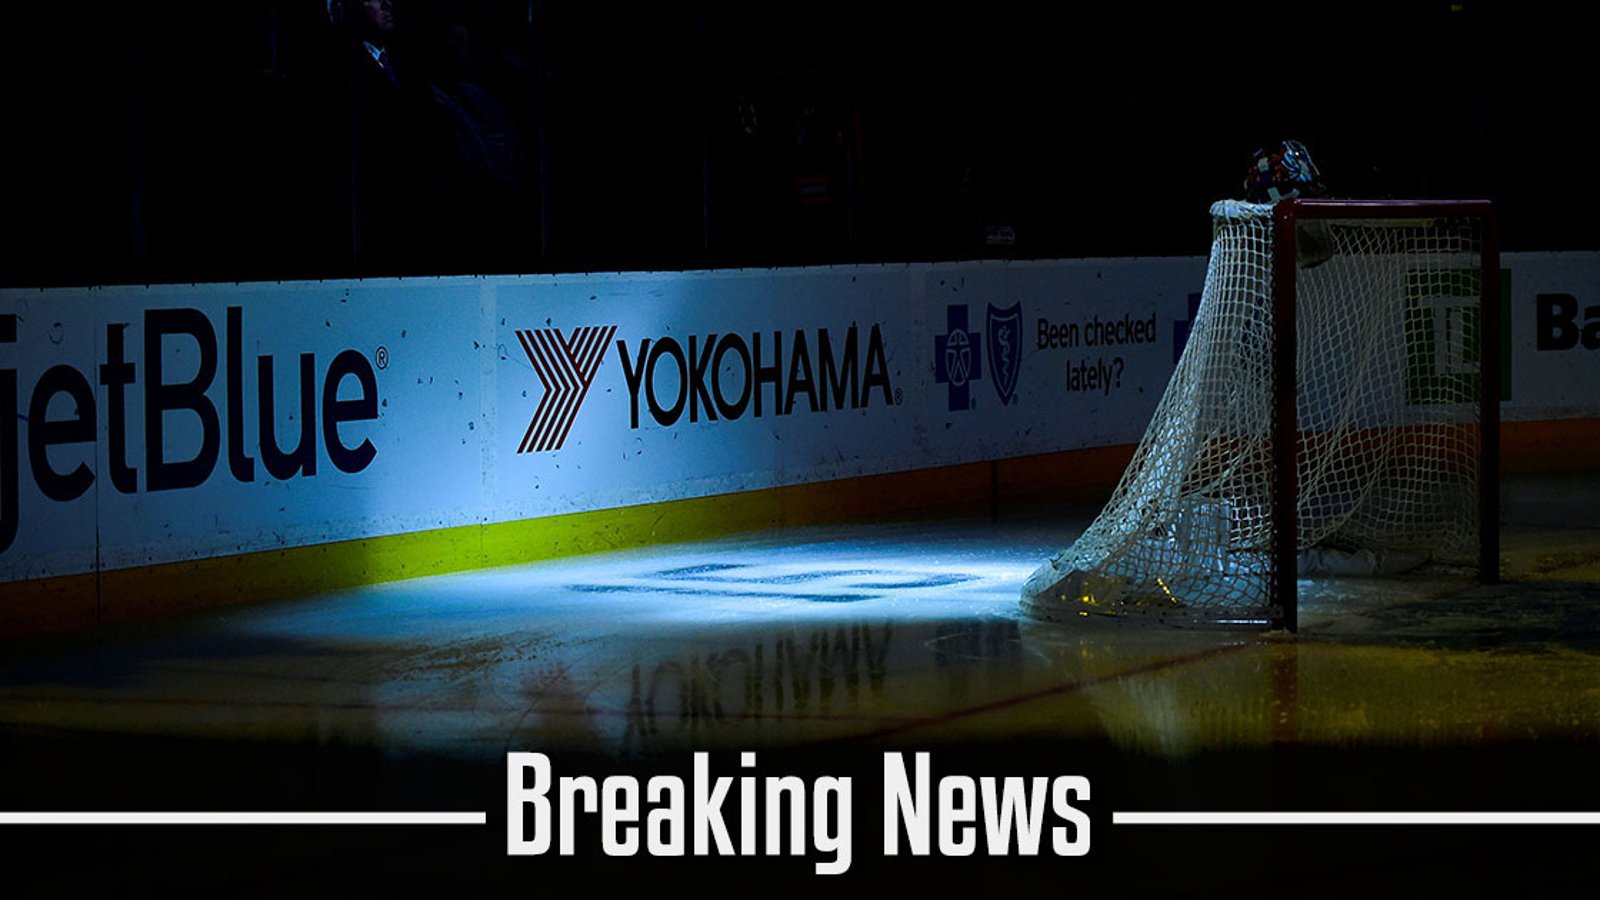 Breaking: Starting goaltender does not come out for the second, not even on the bench.